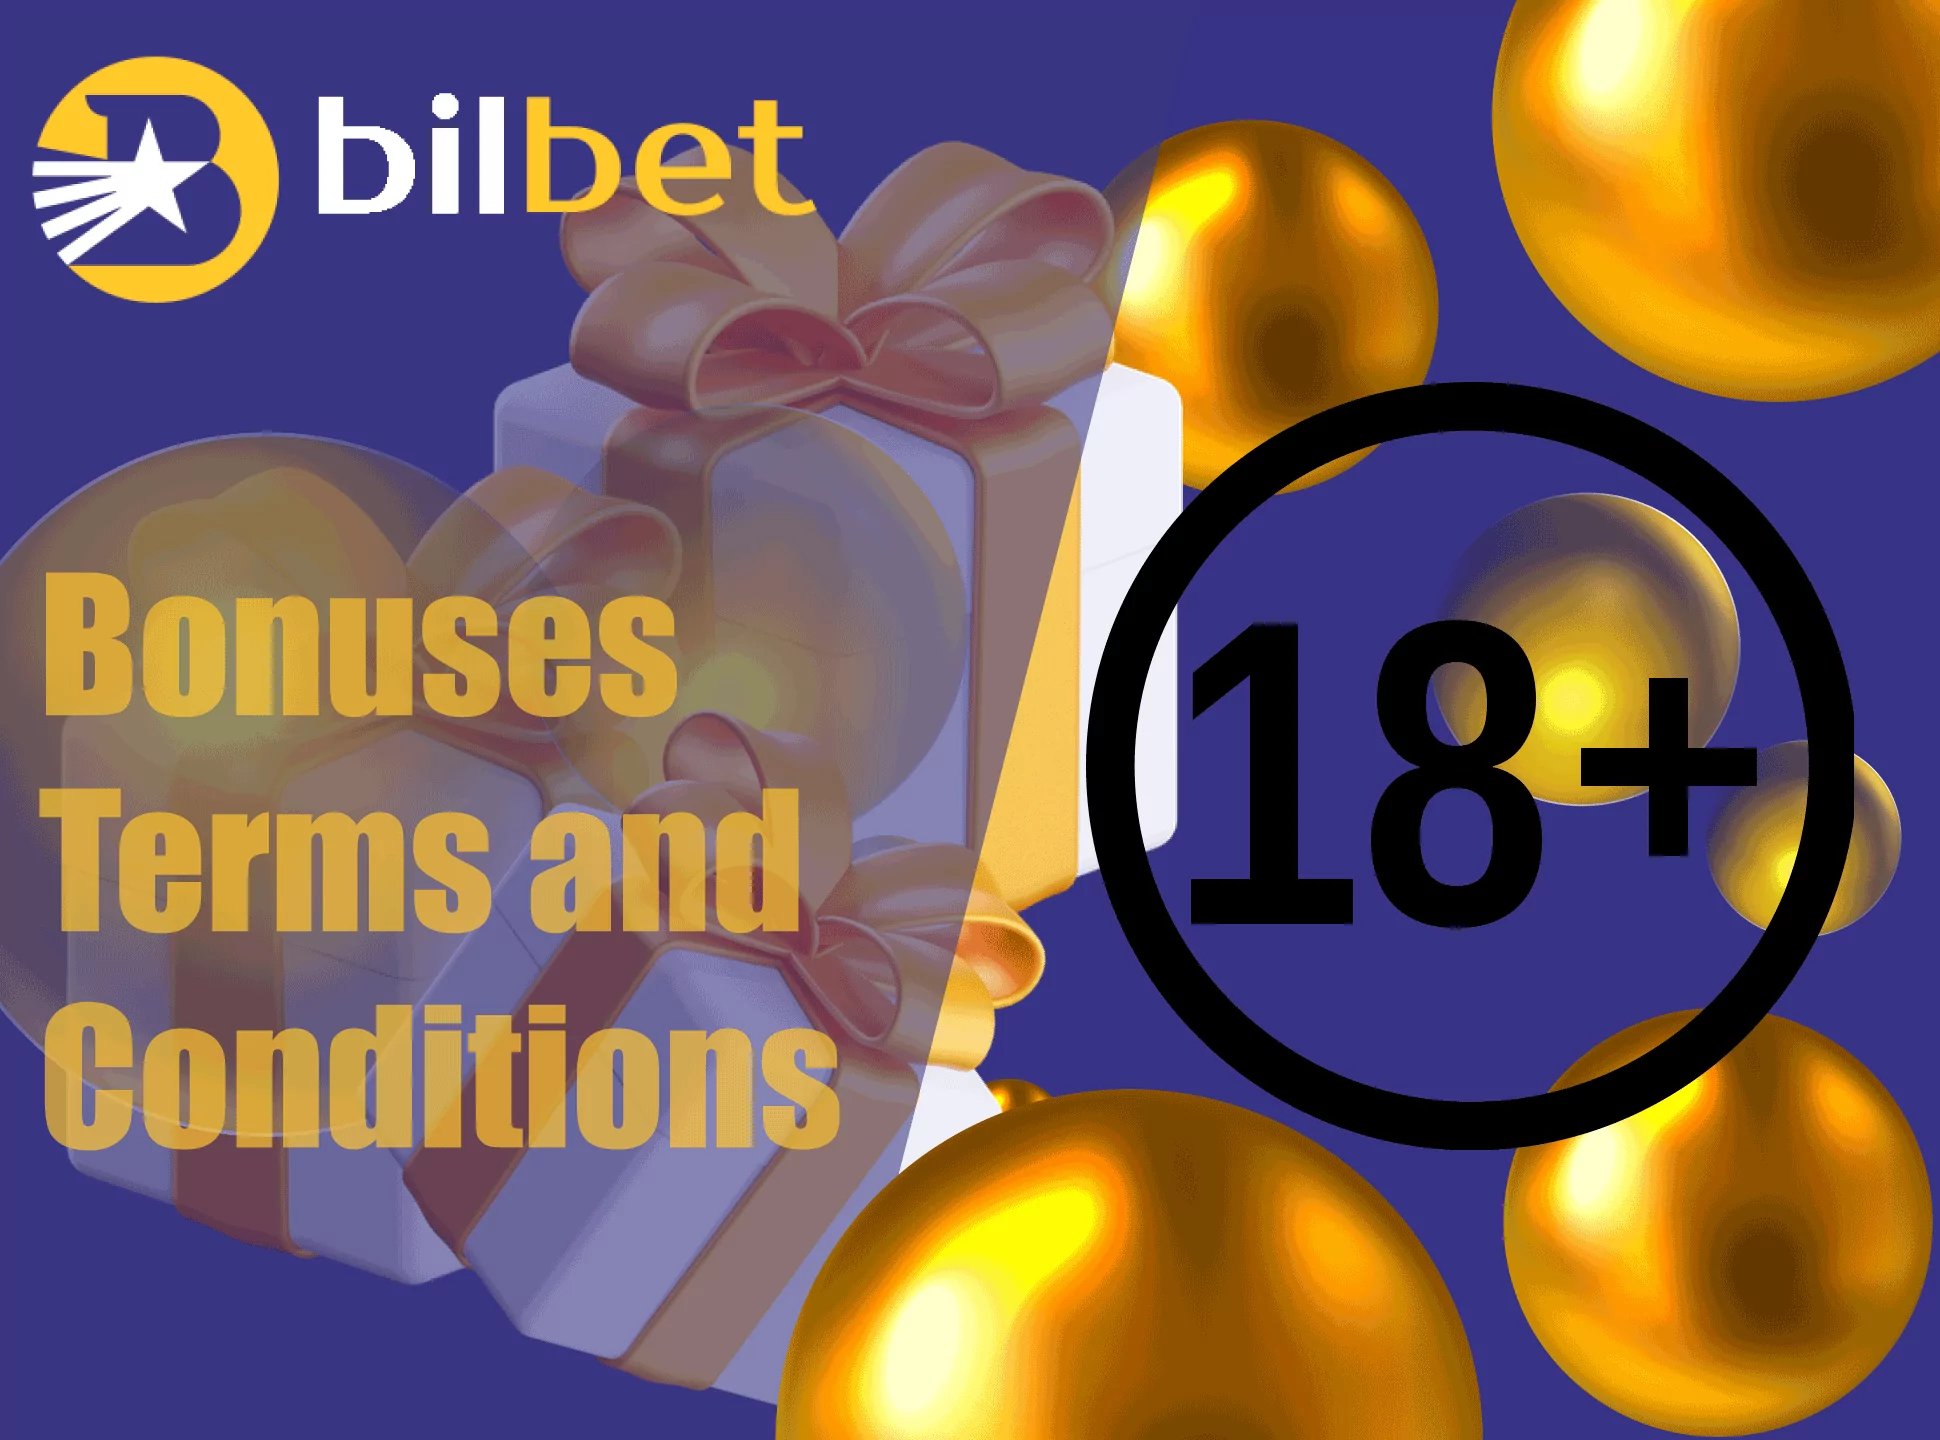 Meet these conditions to get the Bilbet welcome bonus.